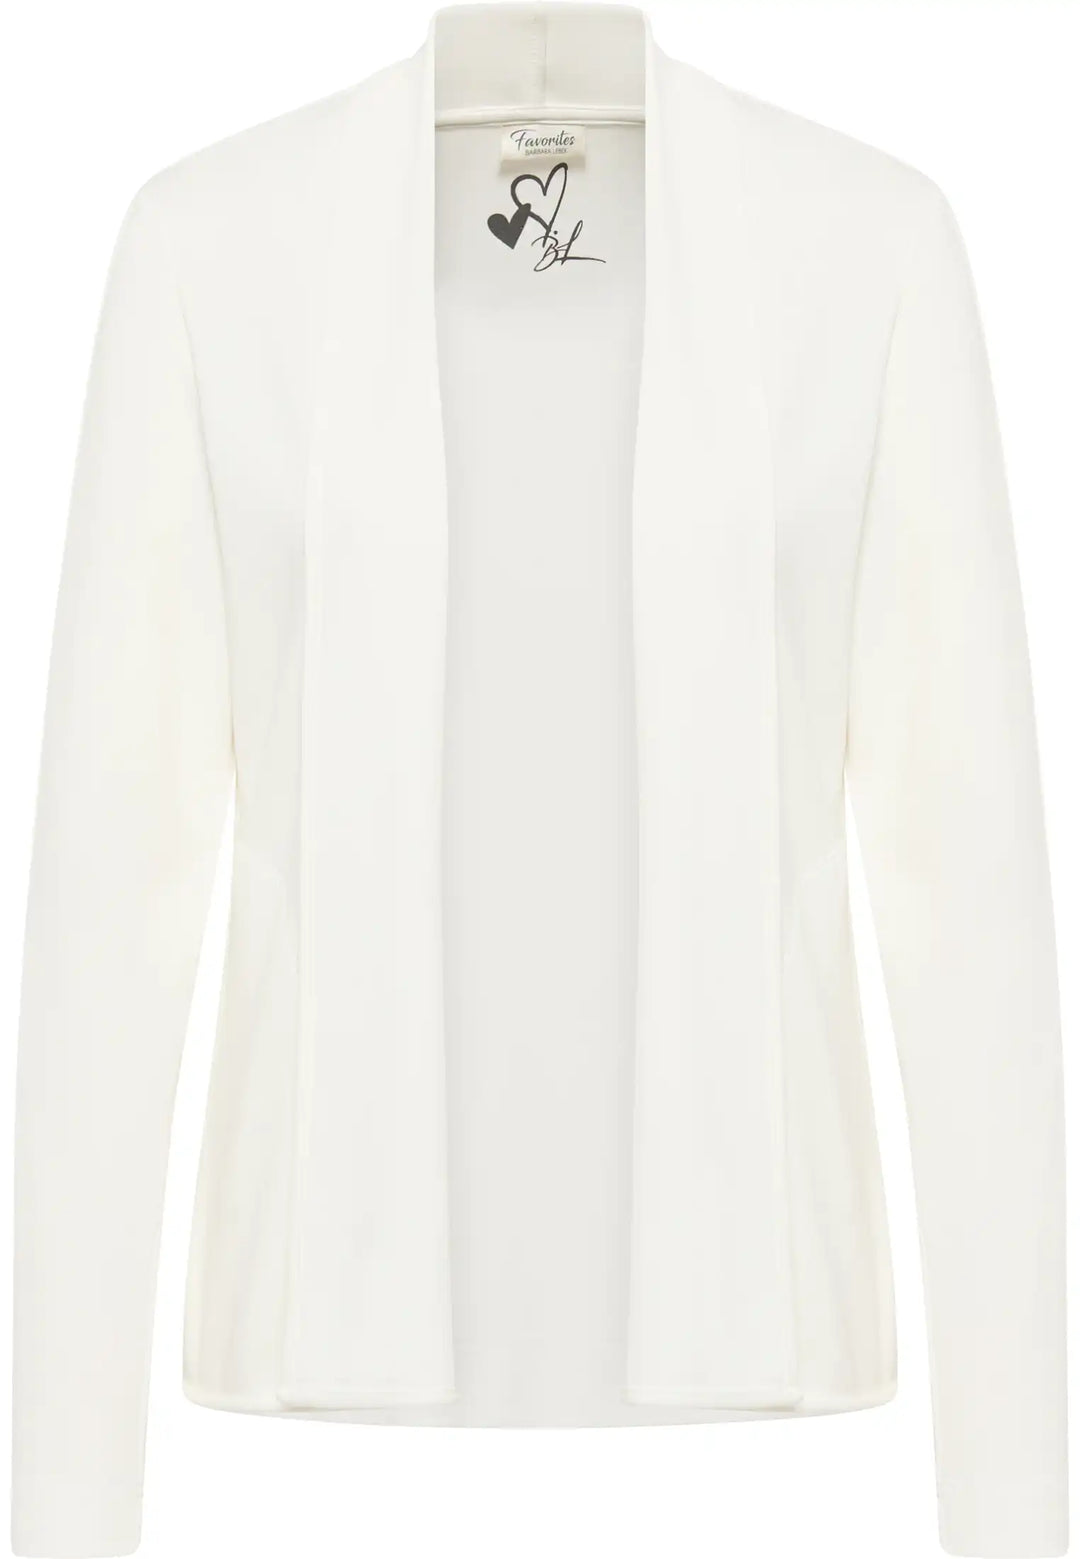 Ecru blazer with a sleek open front and full-length sleeves, offering a clean and sophisticated look, style 57030042-120